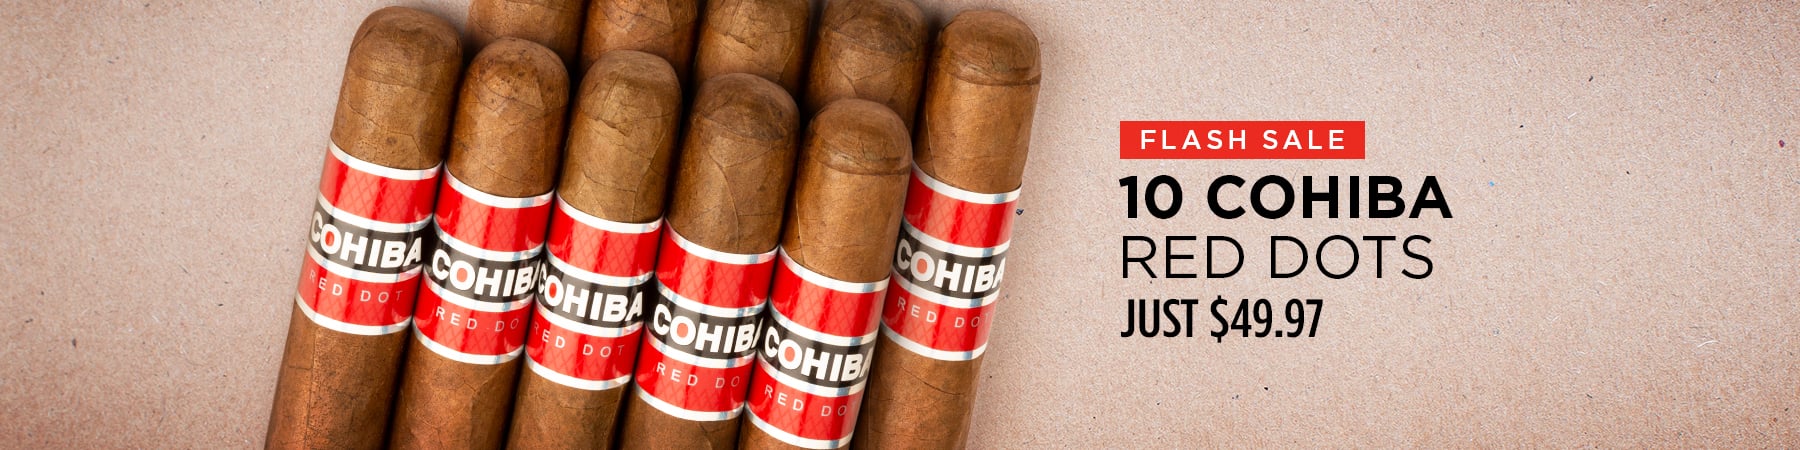 10 Cohiba Red Dots Just $49.97